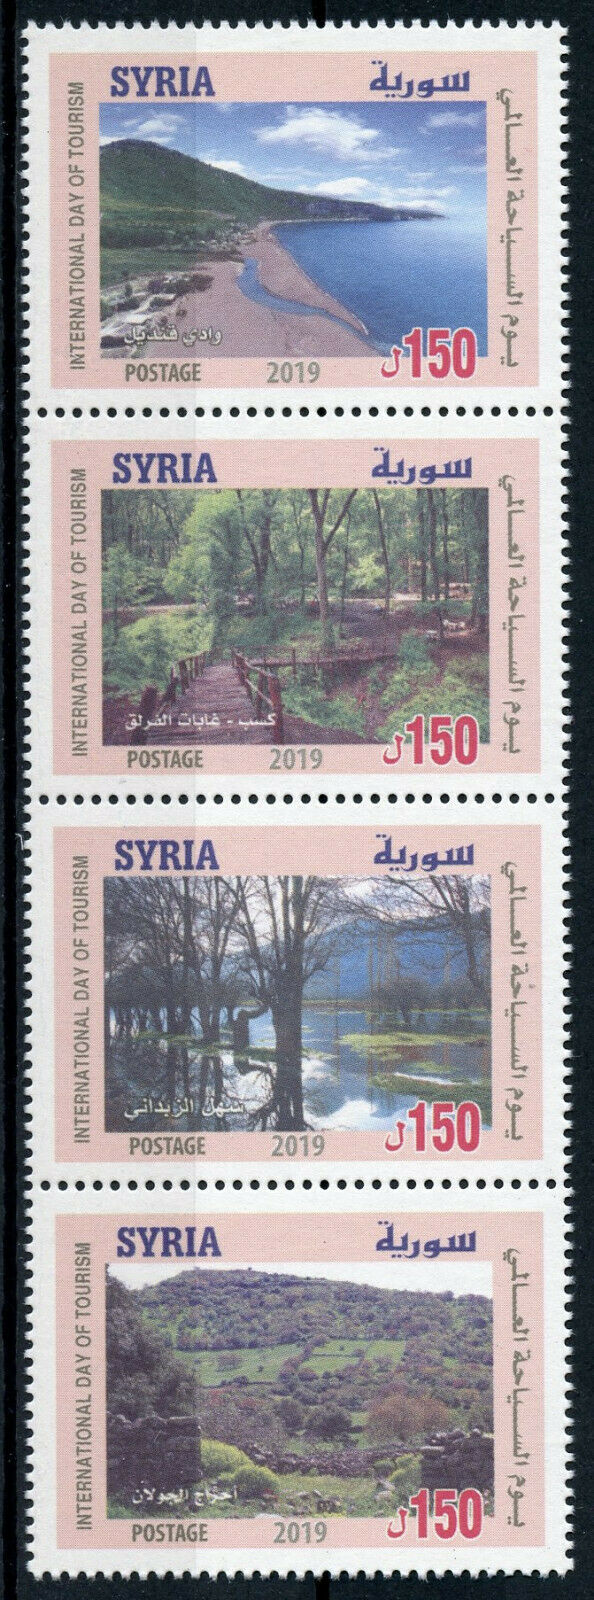 Syria Landscapes Stamps 2019 MNH Intl Day Tourism Trees Nature Beaches 4v Strip